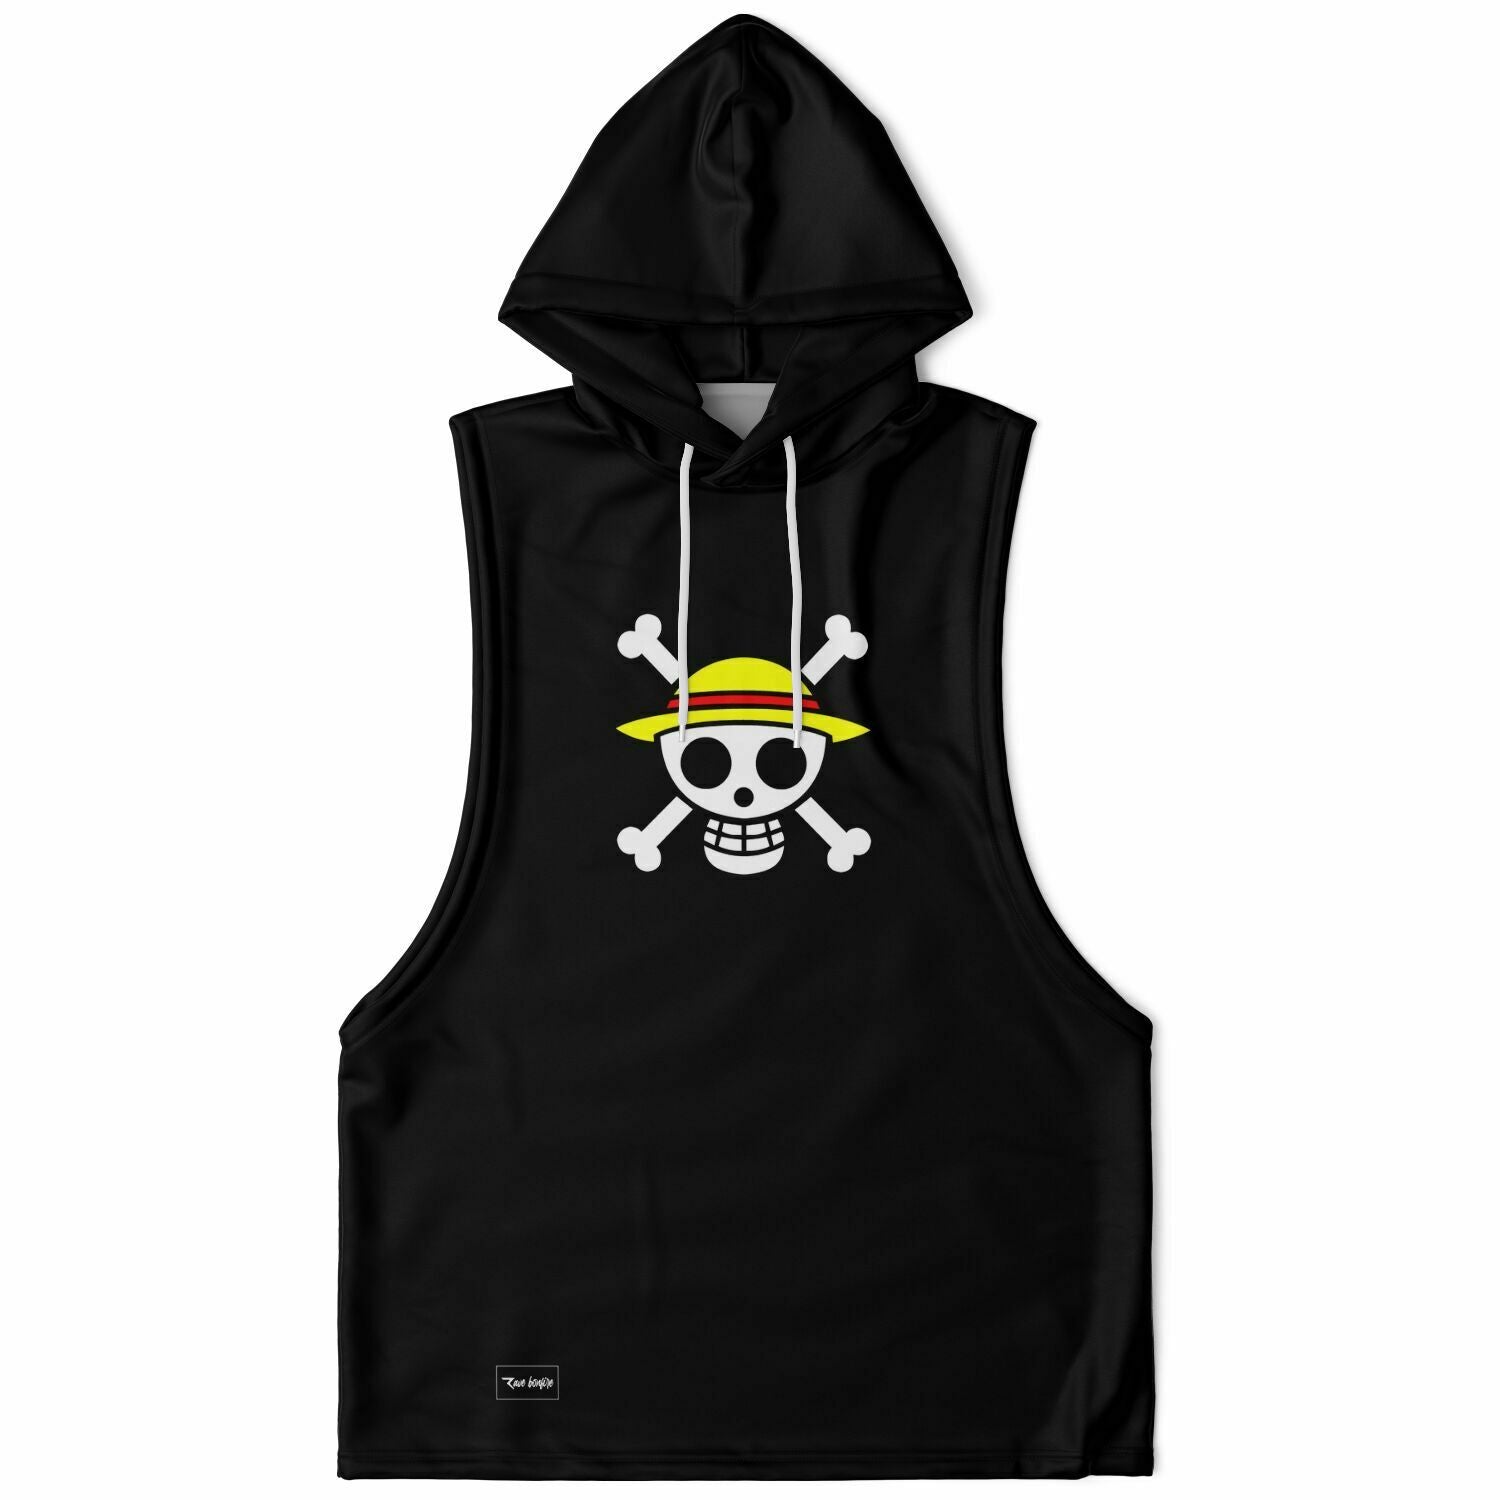 A Luffy one piece sleeveless hoodie with a skull and crossbones on it.